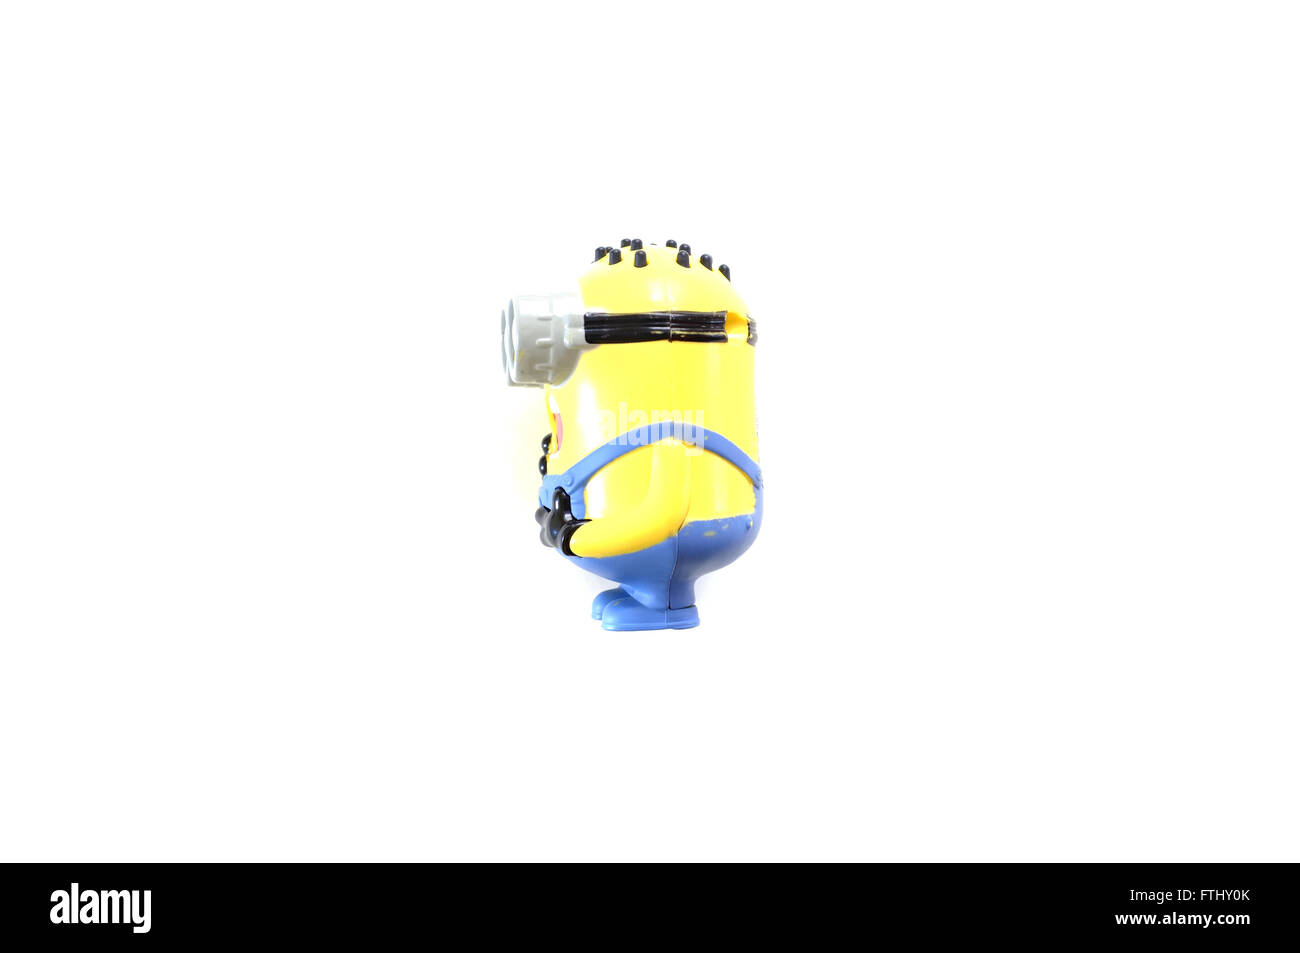 A side view of a toy figure from the Minions film photographed against a white background. Stock Photo